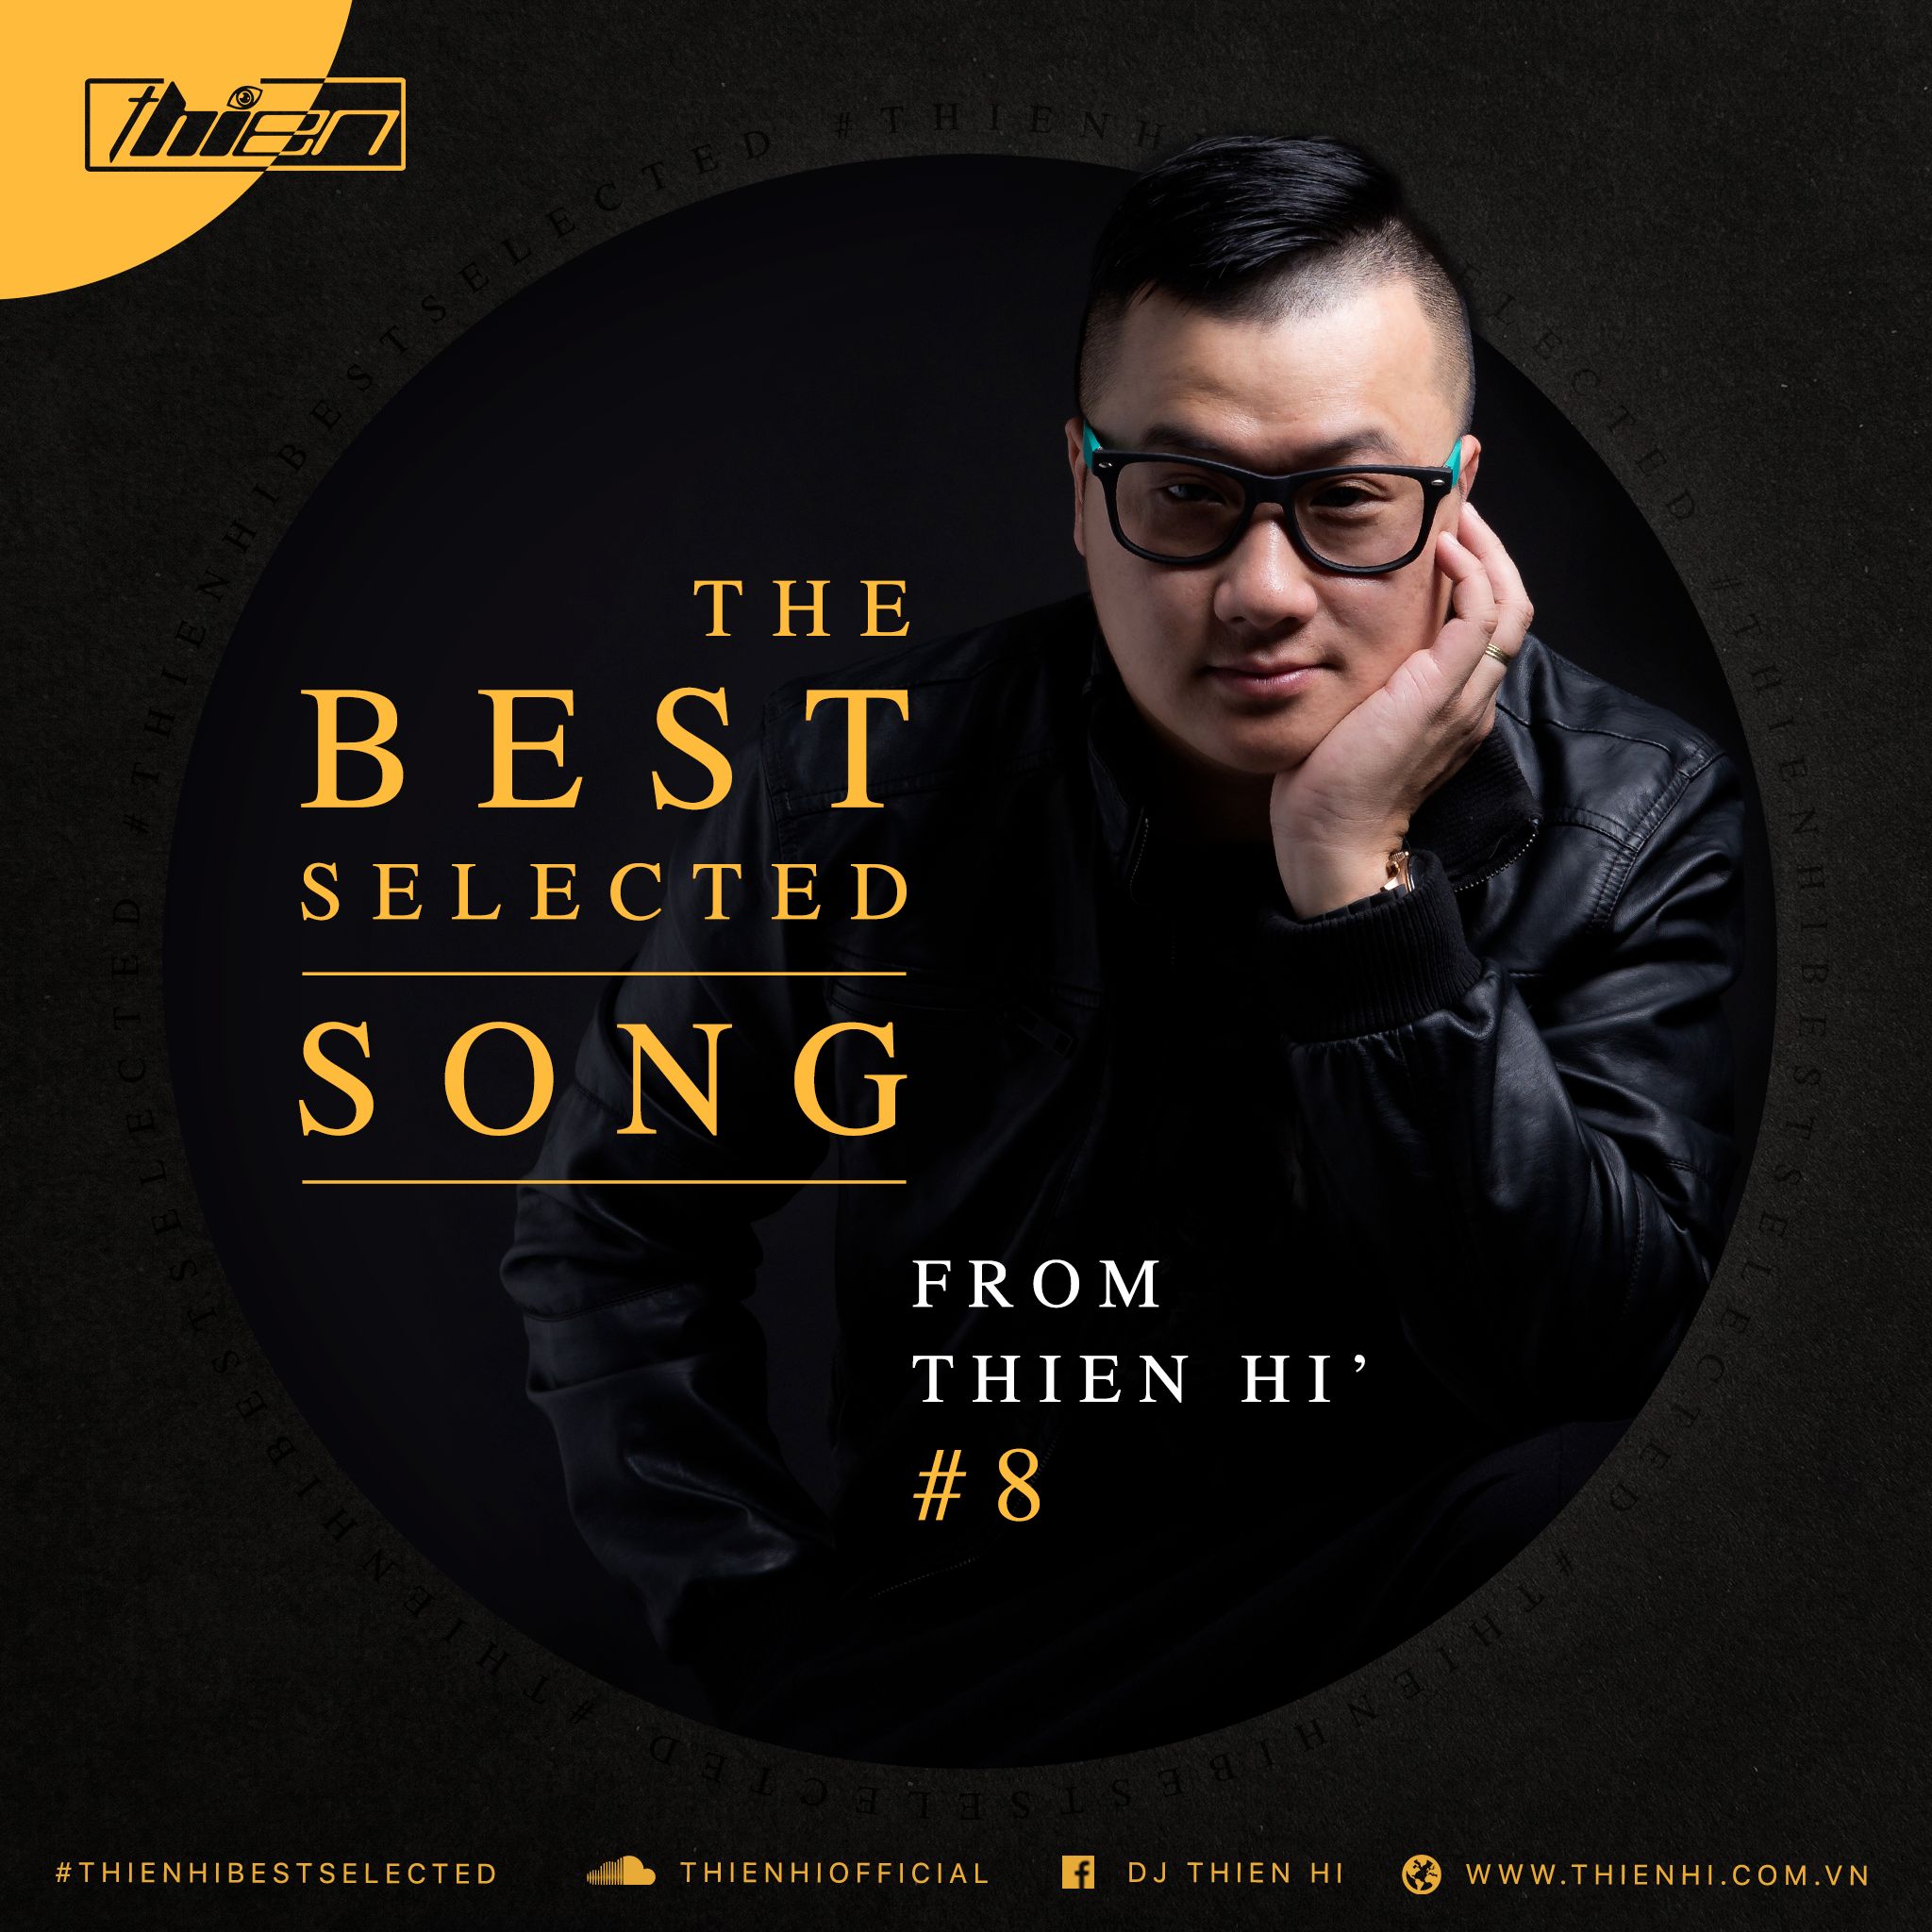 Lae alla Thien Hi - The Best Selected Song #8